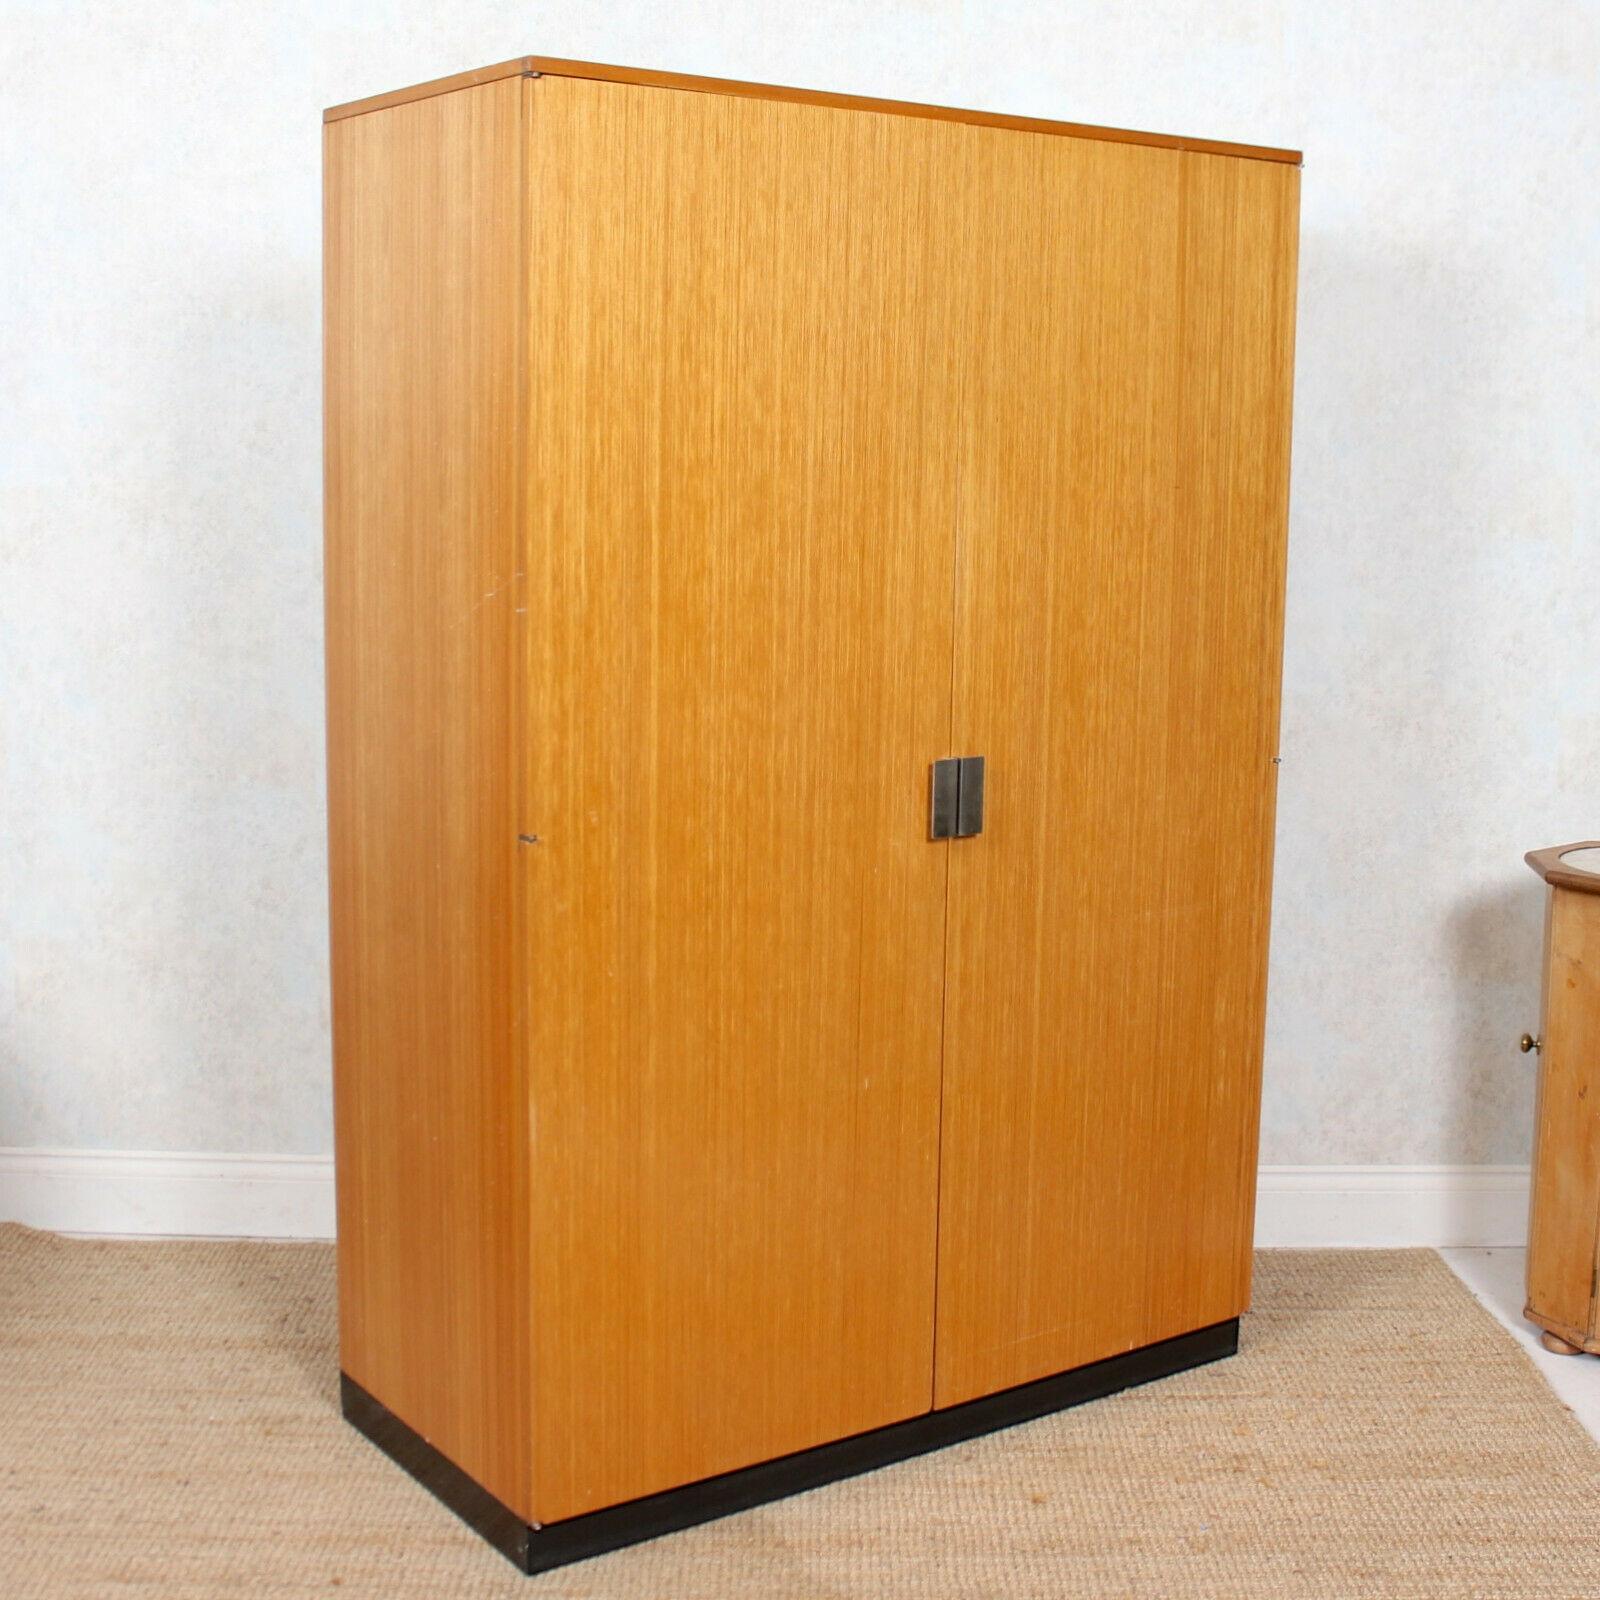 English Stag Wardrobe Retro Double Compactum In Good Condition For Sale In Newcastle upon Tyne, GB